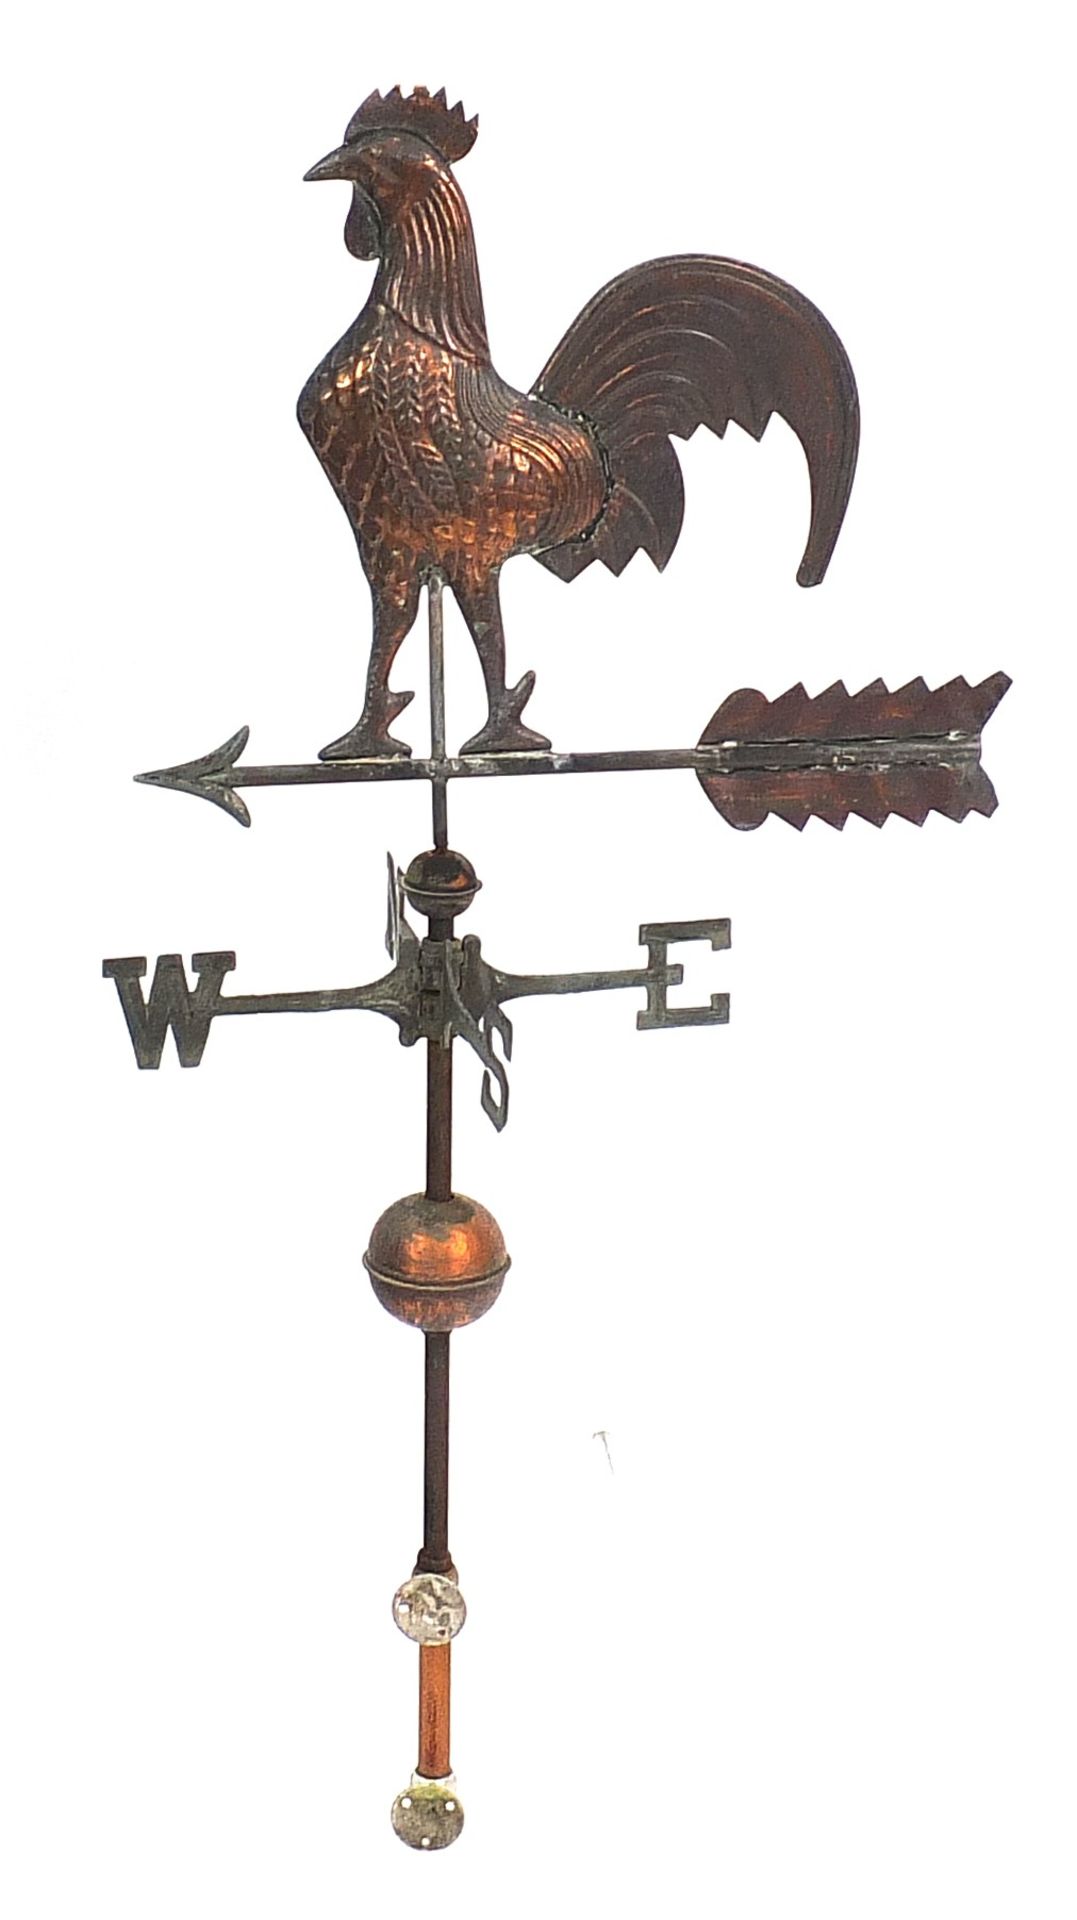 Antique copper and brass rooster weather vane, possibly American, 130cm high